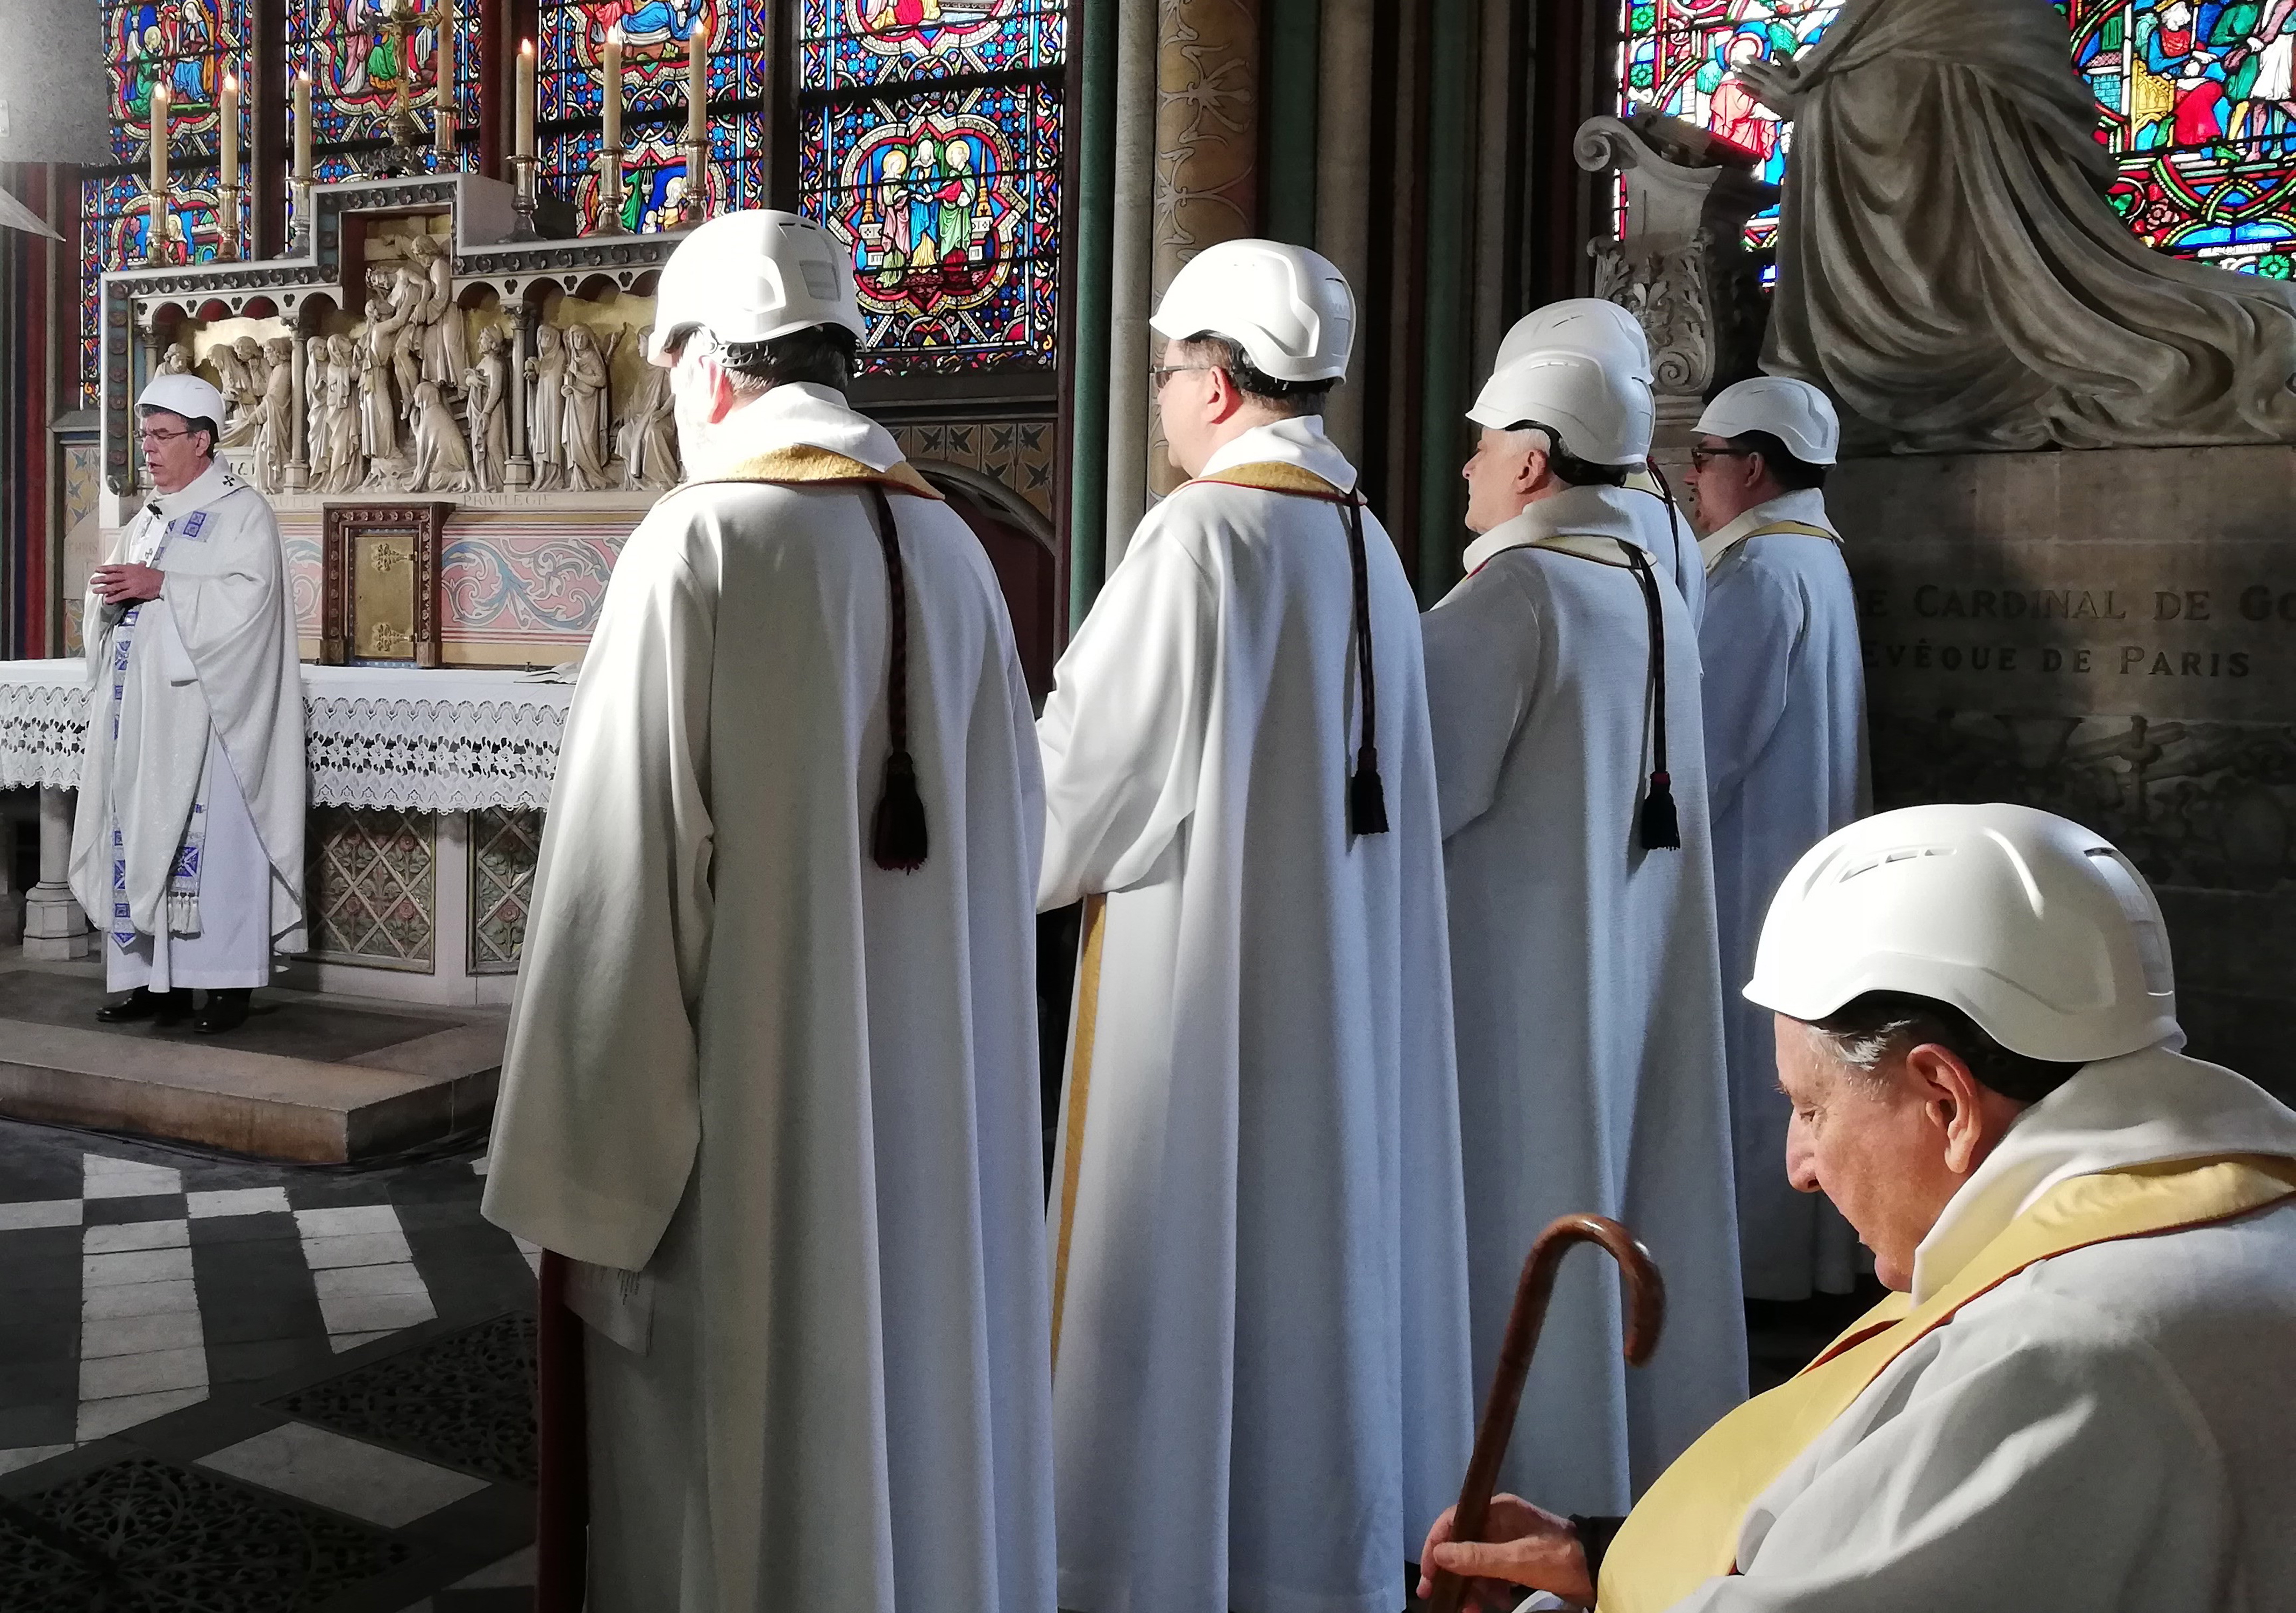 epa07650568 Clerics wear protective helmets as they attend a mass led by Michel Aupetit (L), Archbishop of Paris, which is the first church service in a side chapel of Notre-Dame de Paris cathedral in Paris, France, 15 June 2019, two months to the day after a devastating fire. For safety reasons, the mass was celebrated on a very small scale, but was streamed live on internet.  EPA/KARINE PERRET / POOL  MAXPPP OUT